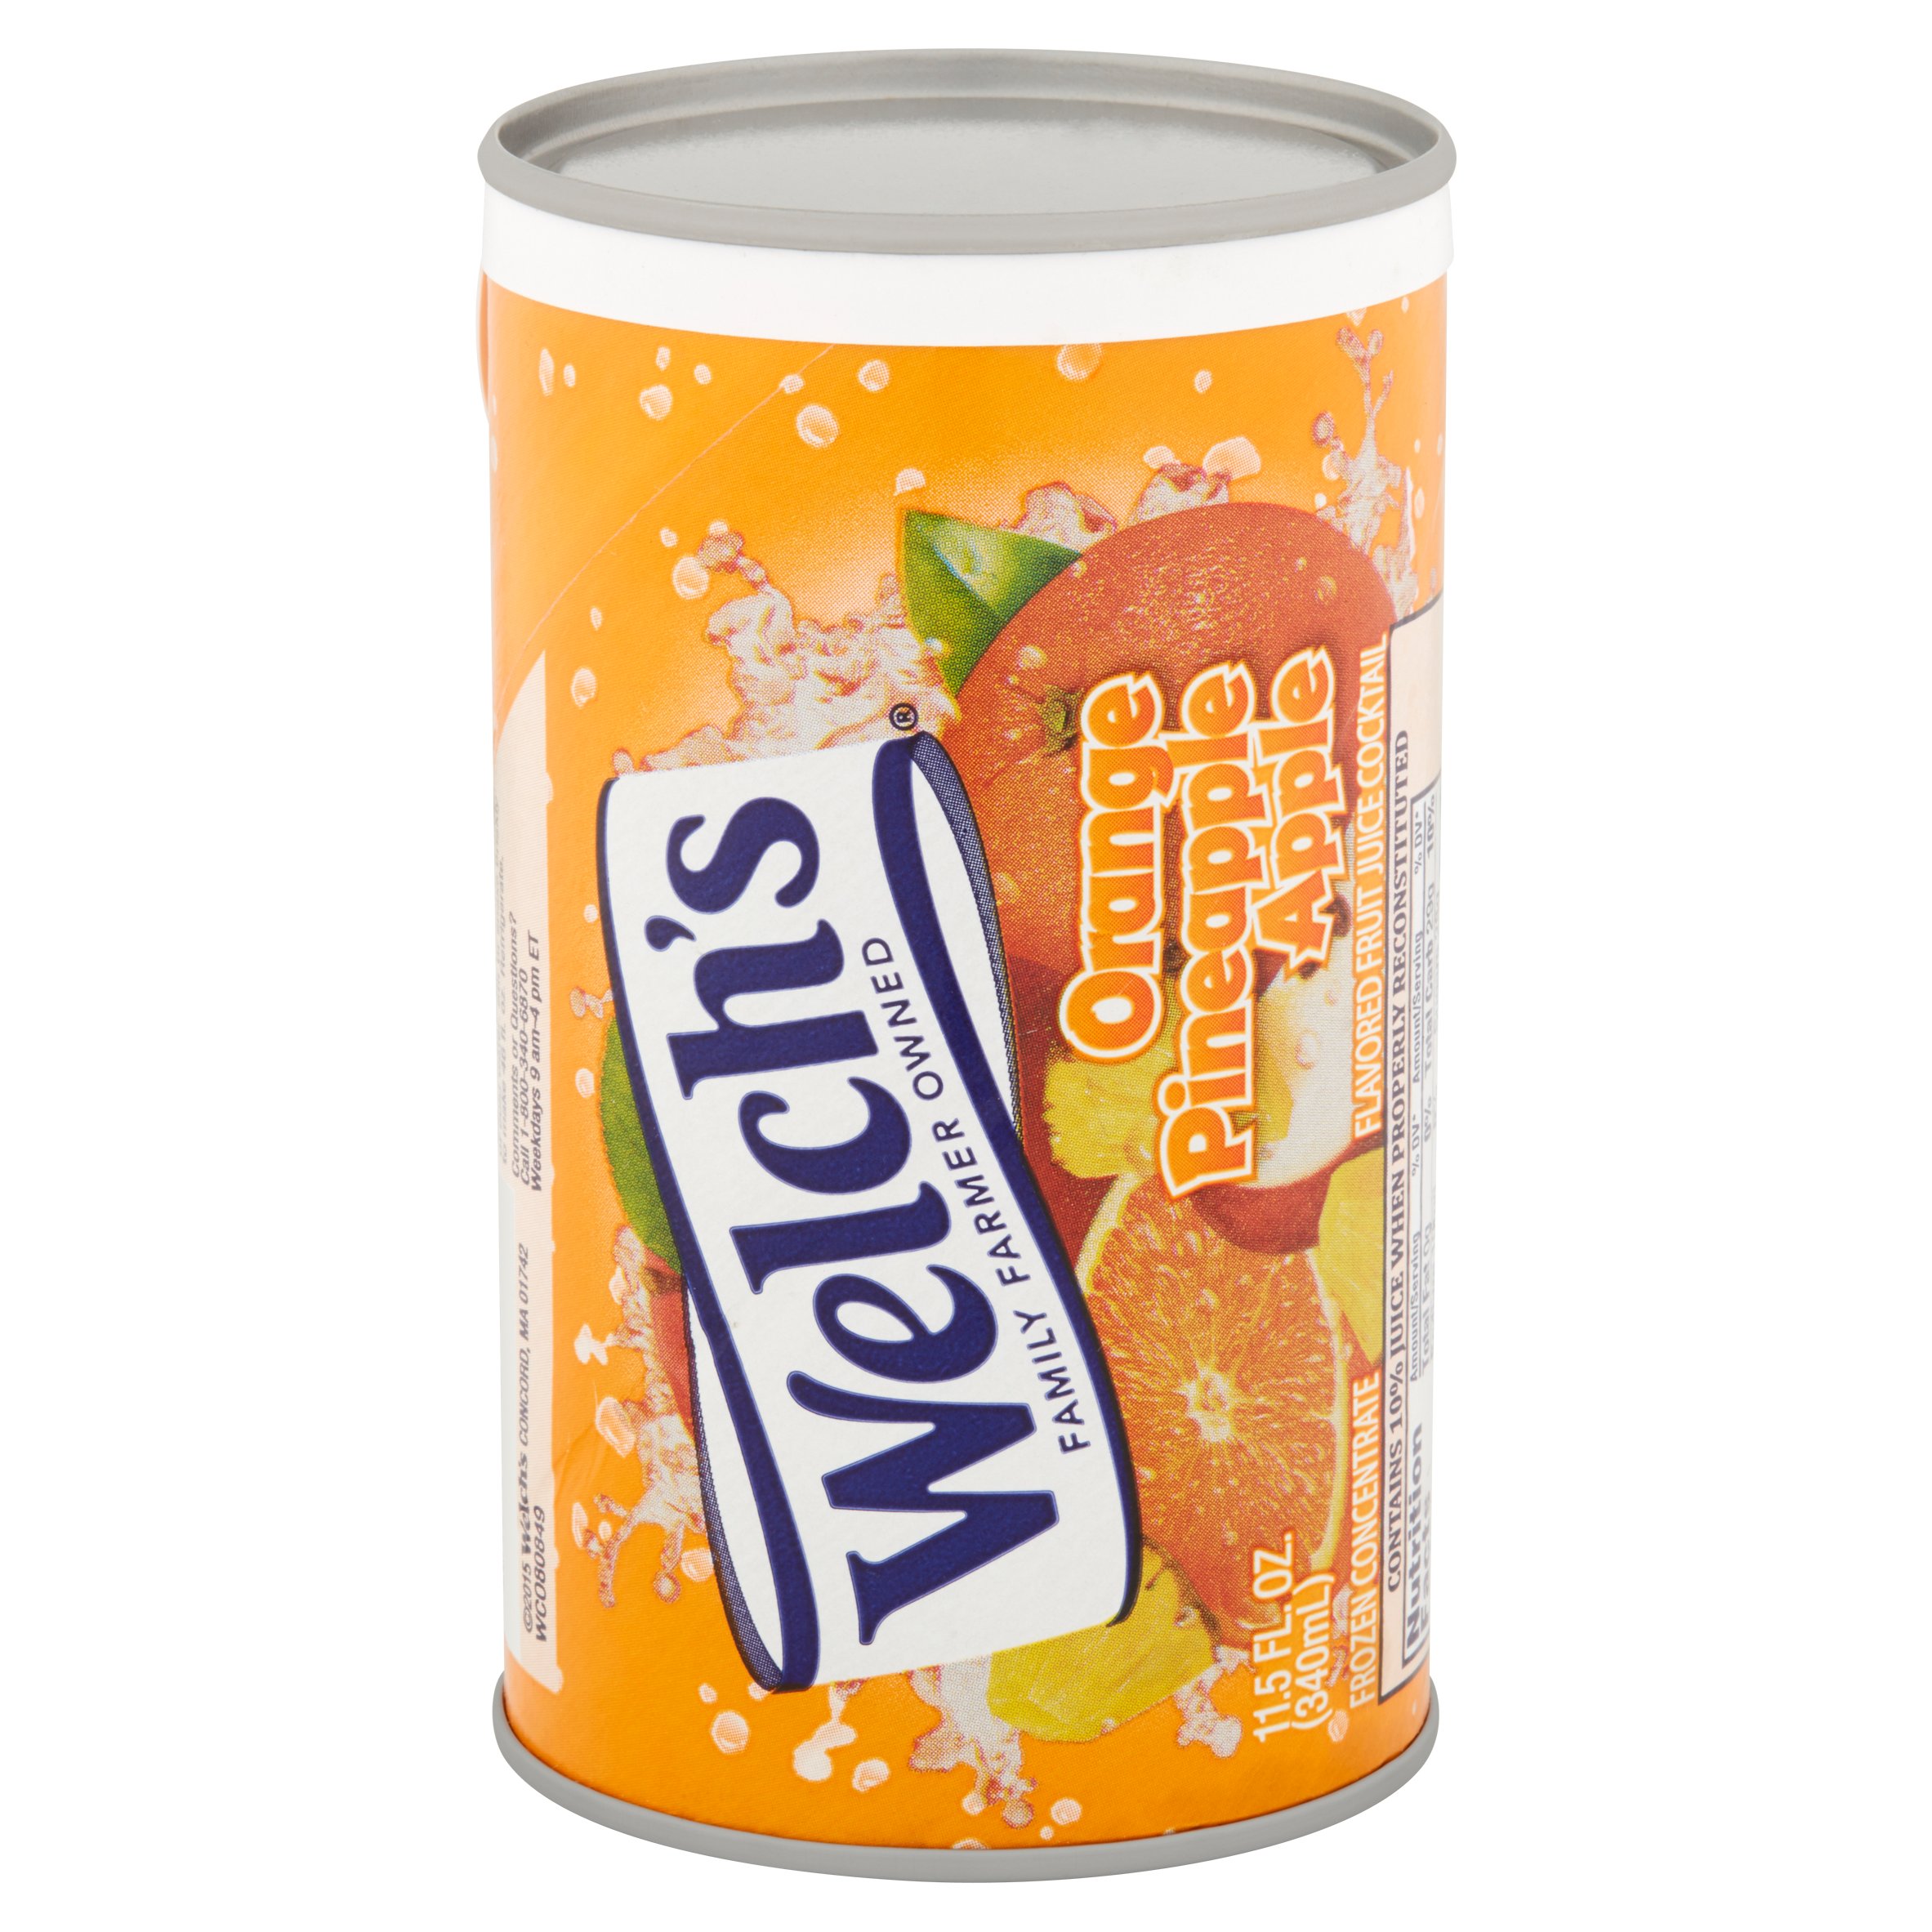 Welch's Orange Pineapple Apple Juice Concentrate, 11.5 oz - image 2 of 4